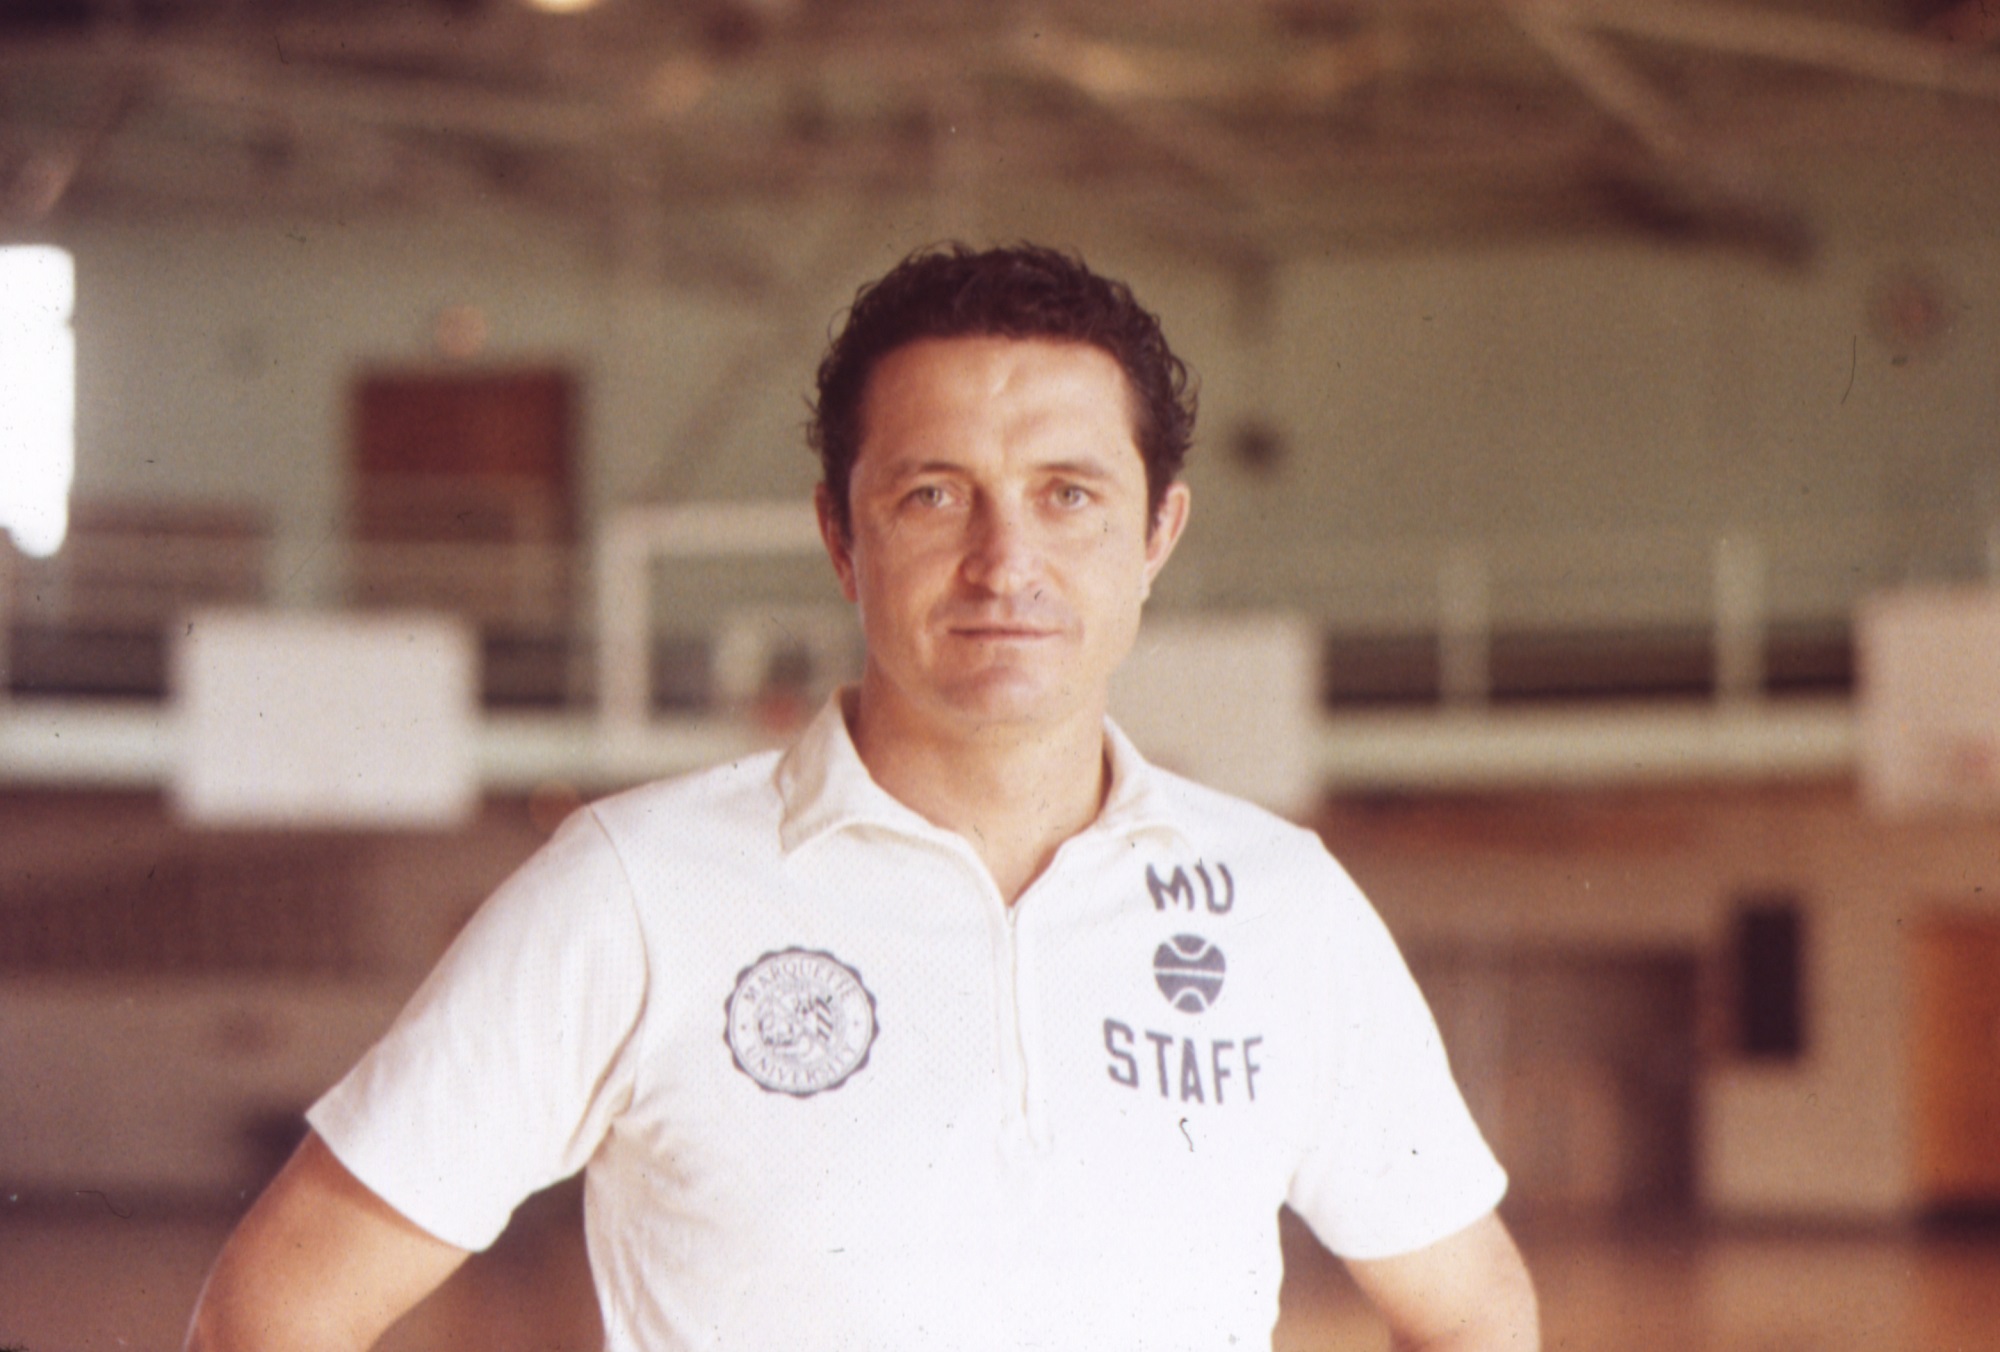 Men's basketball coach Al McGuire in 1971. (Courtesy of the Department of Special Collections and University Archives, Raynor Memorial Libraries, Marquette University)